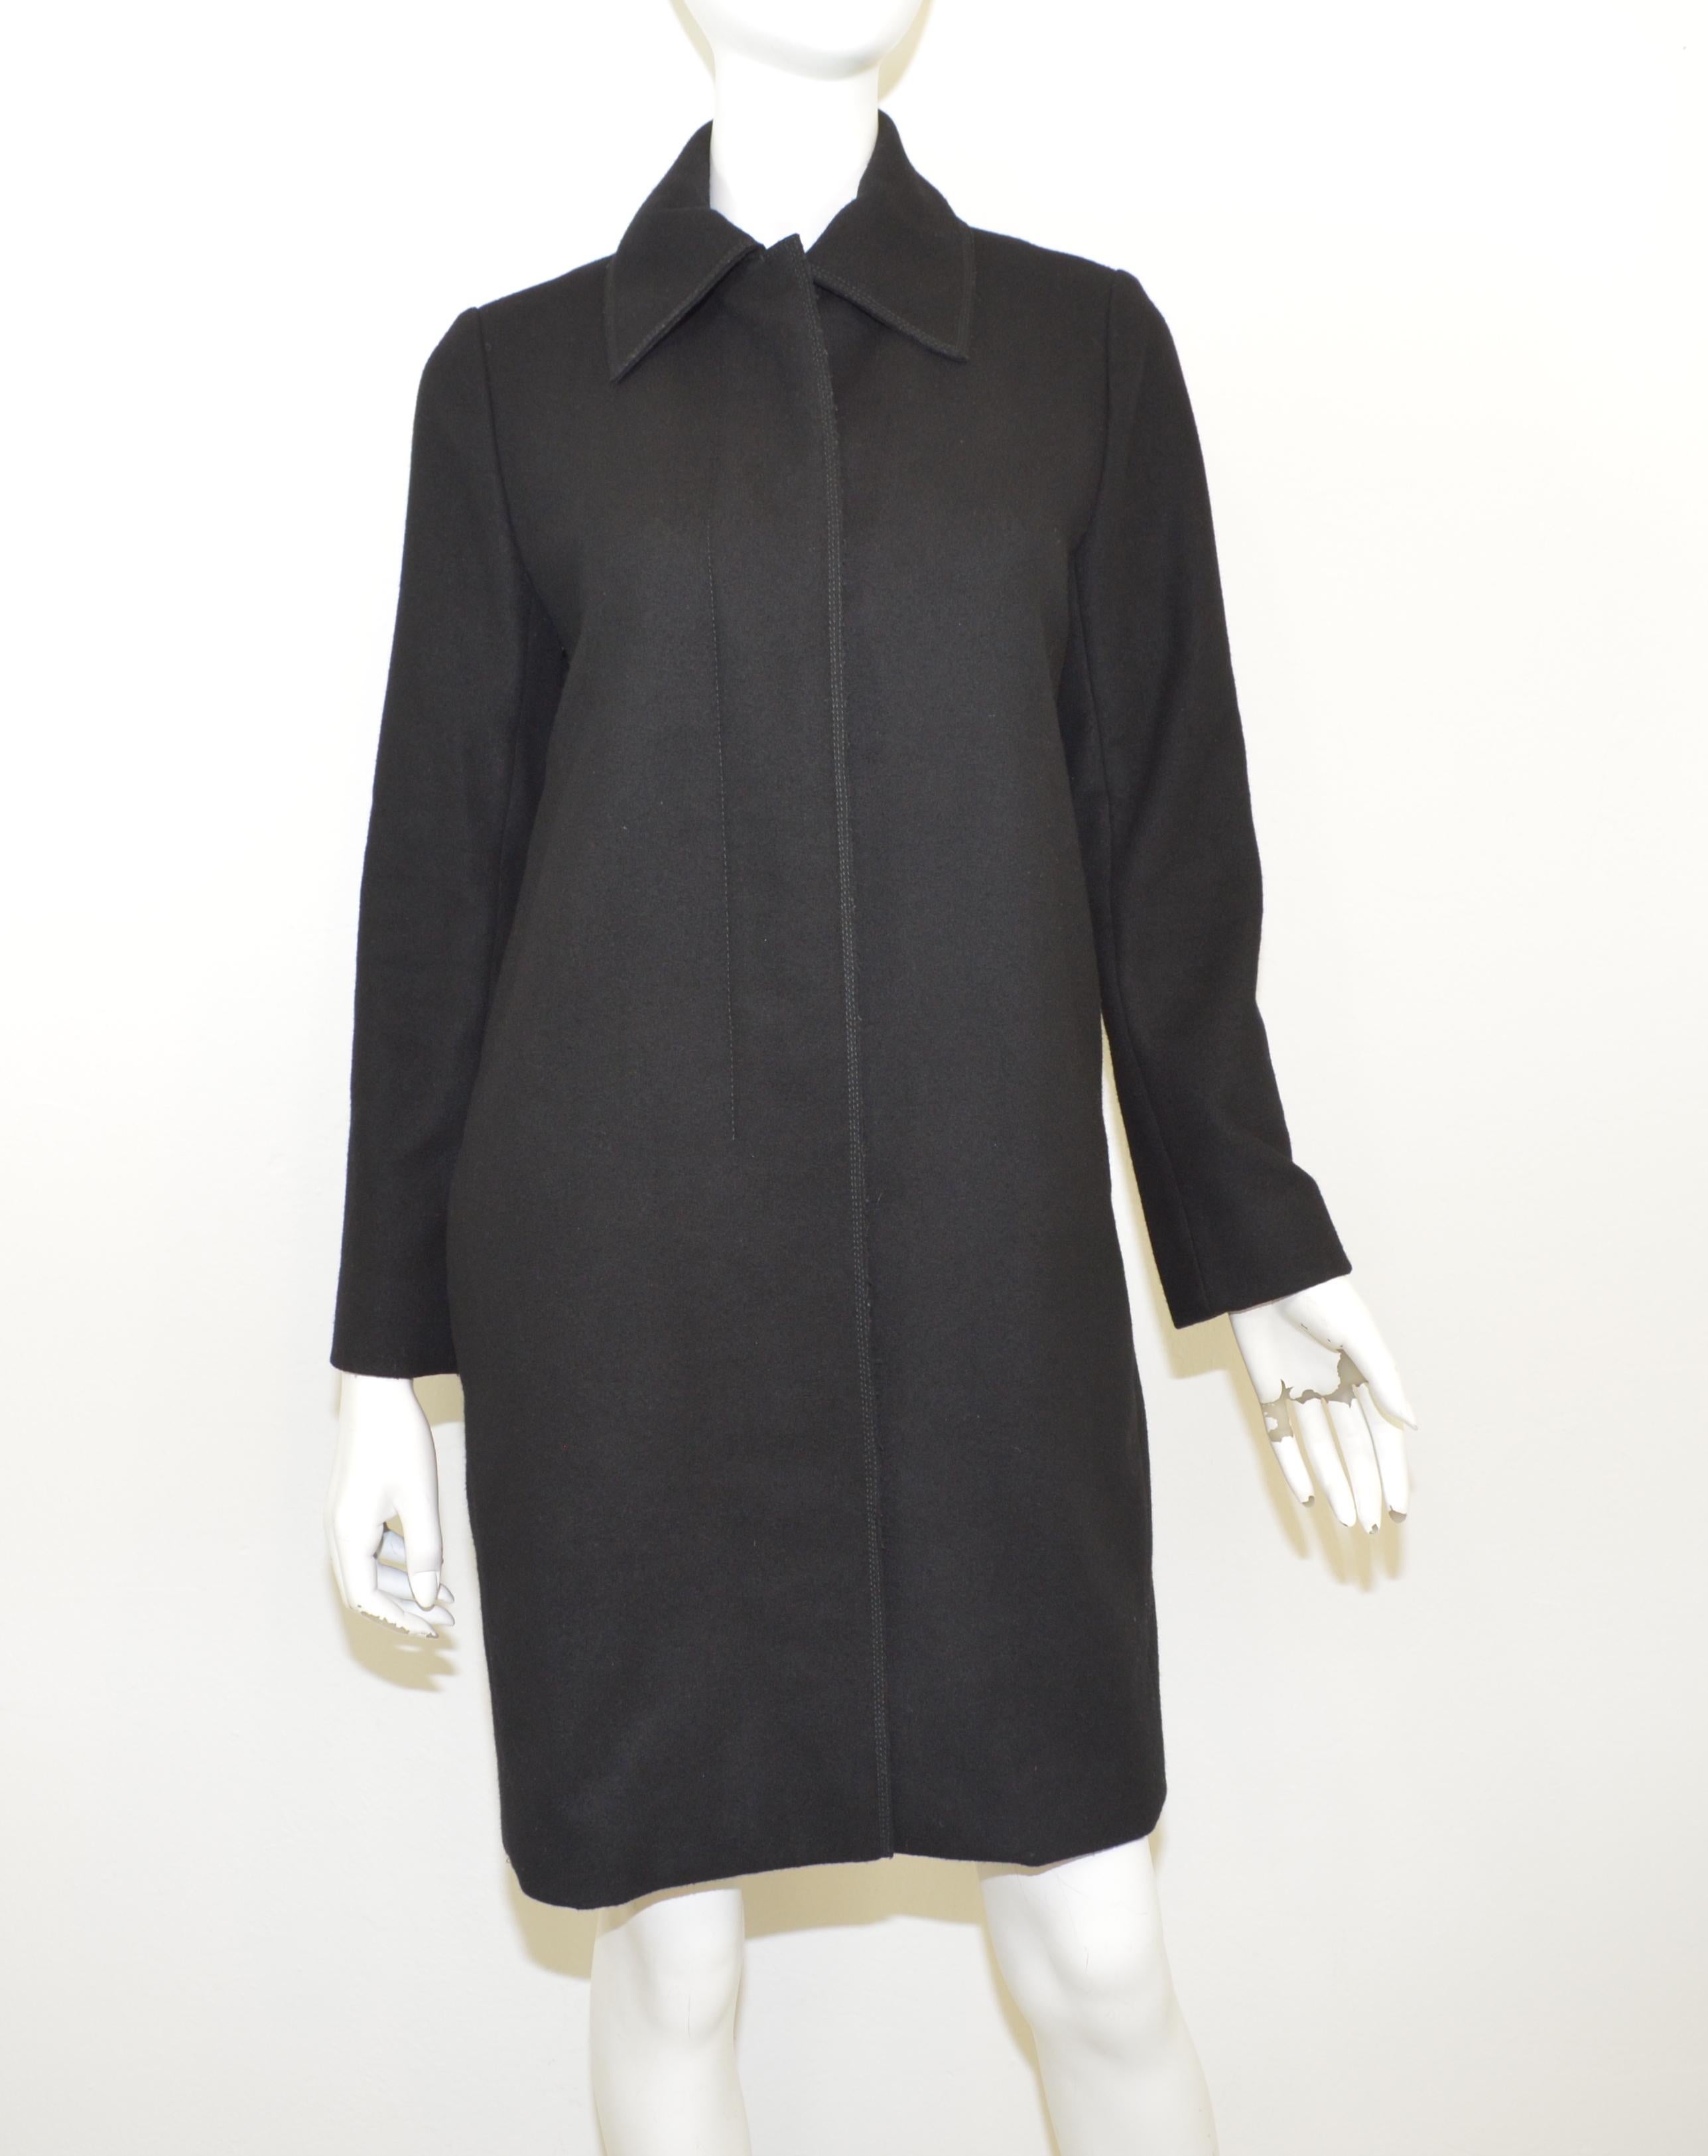 Chloe coat features concealed button closures along the front with pockets at the hips, composed with 100% wool, size 38, made in Slovakia. Excellent condition.

Measurements:
Bust 36''
Sleeves 23''
Hips 42''
Length 38''
Shoulder to shoulder 15.5''